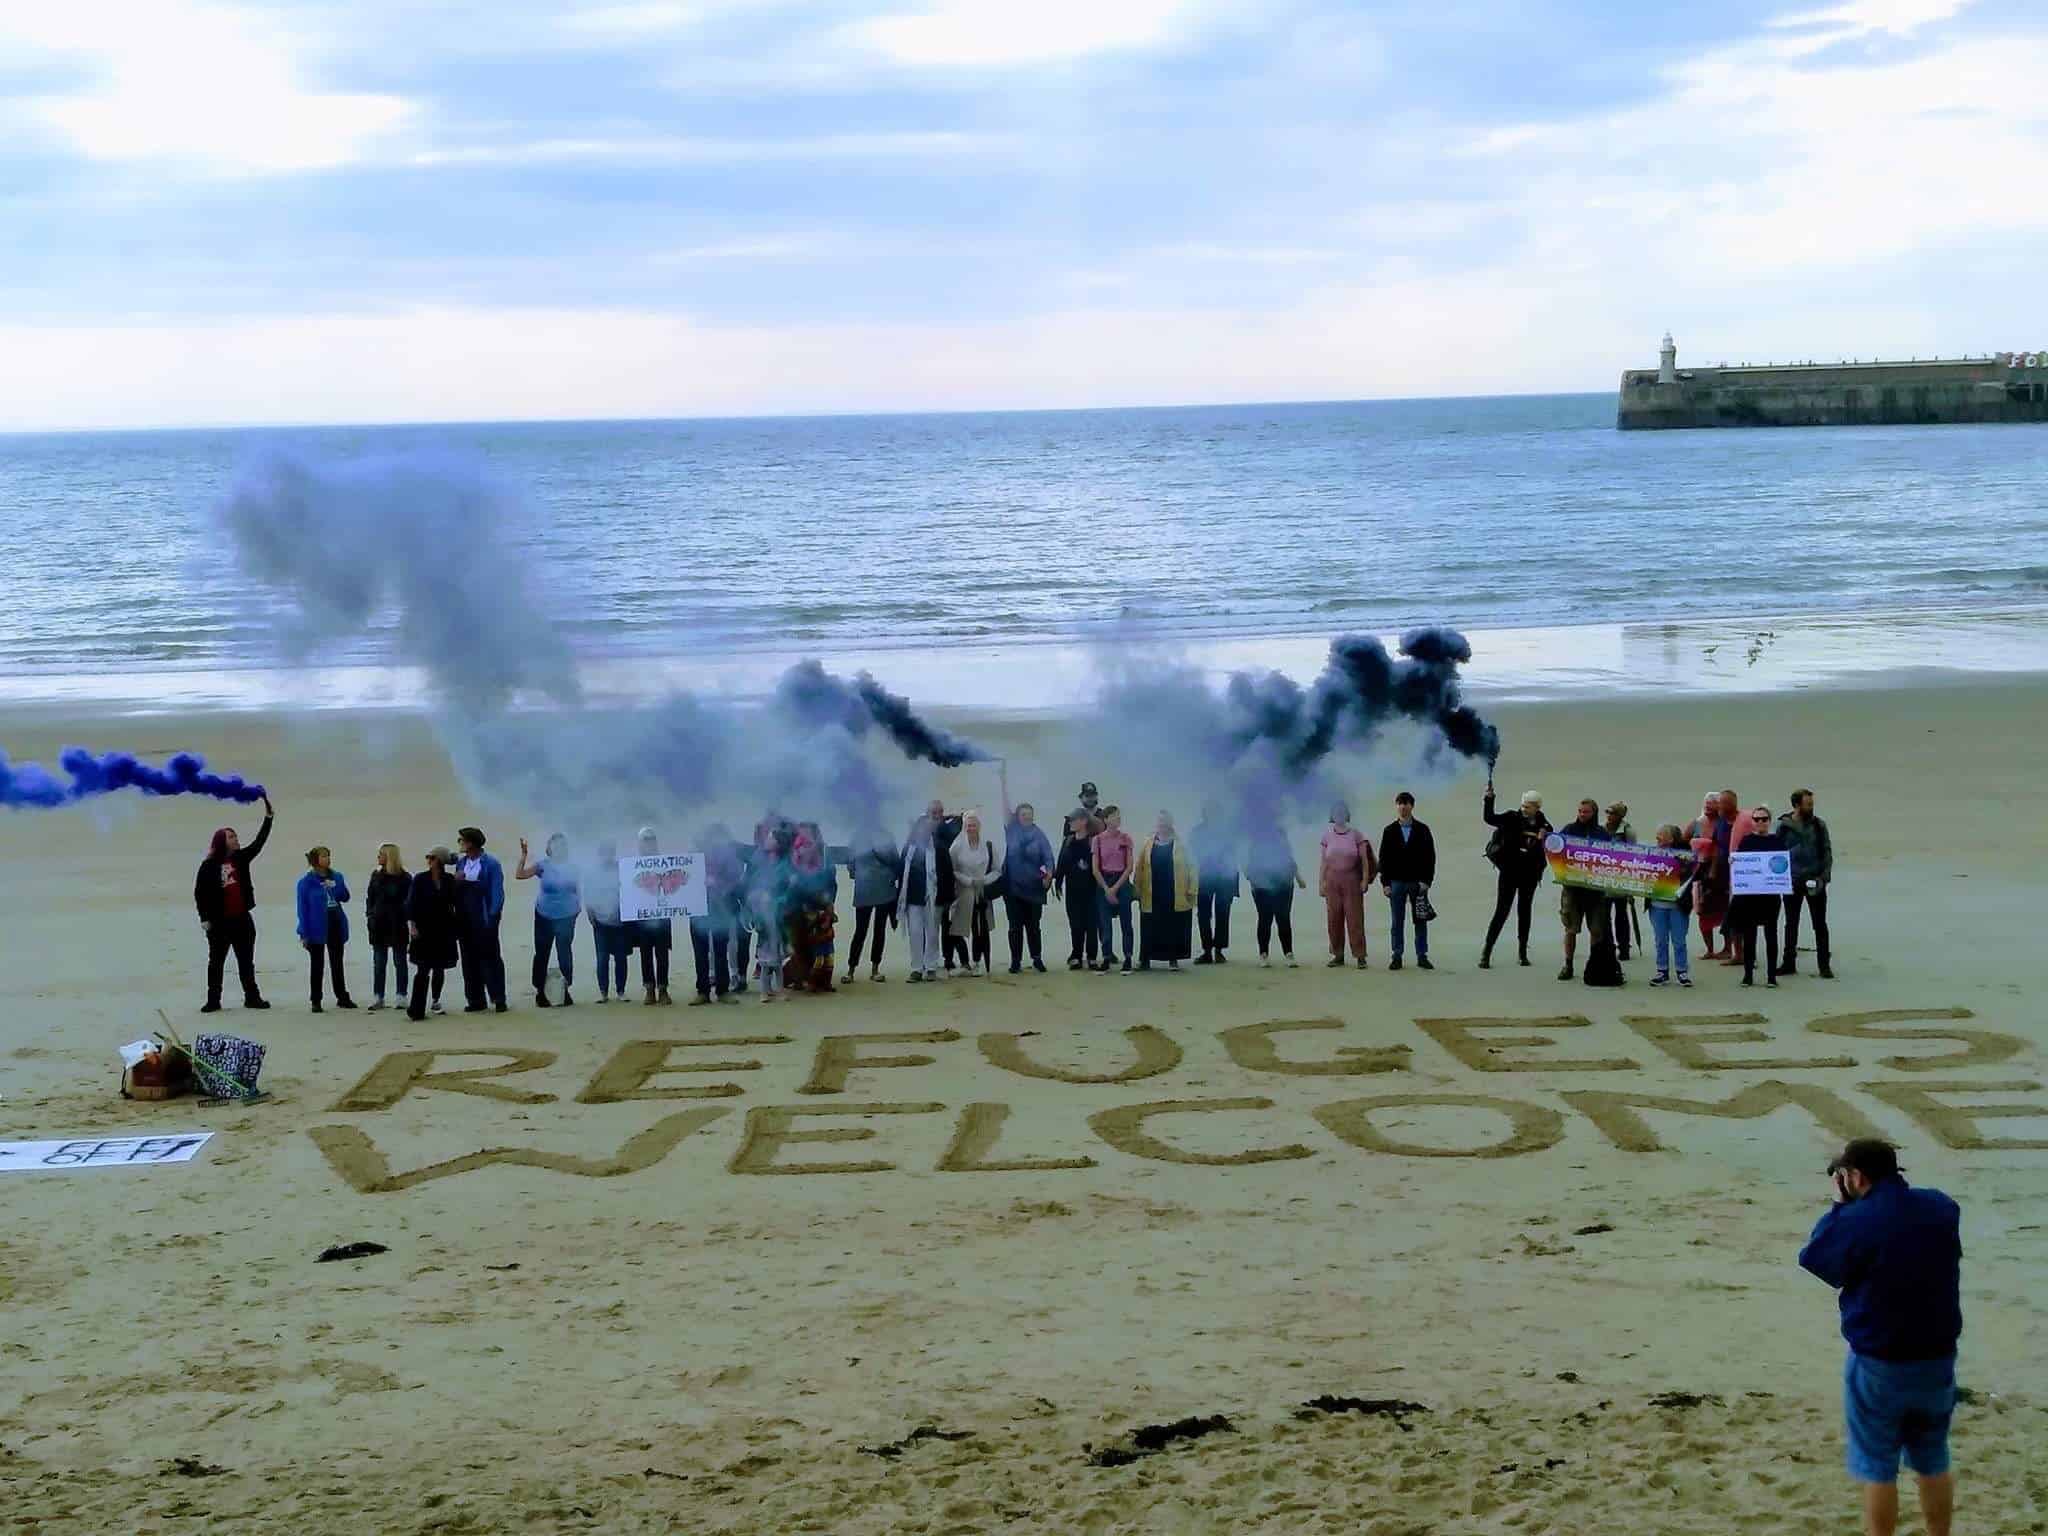 “Refugees Welcome” event held on beach targeted by far-right beach patrols